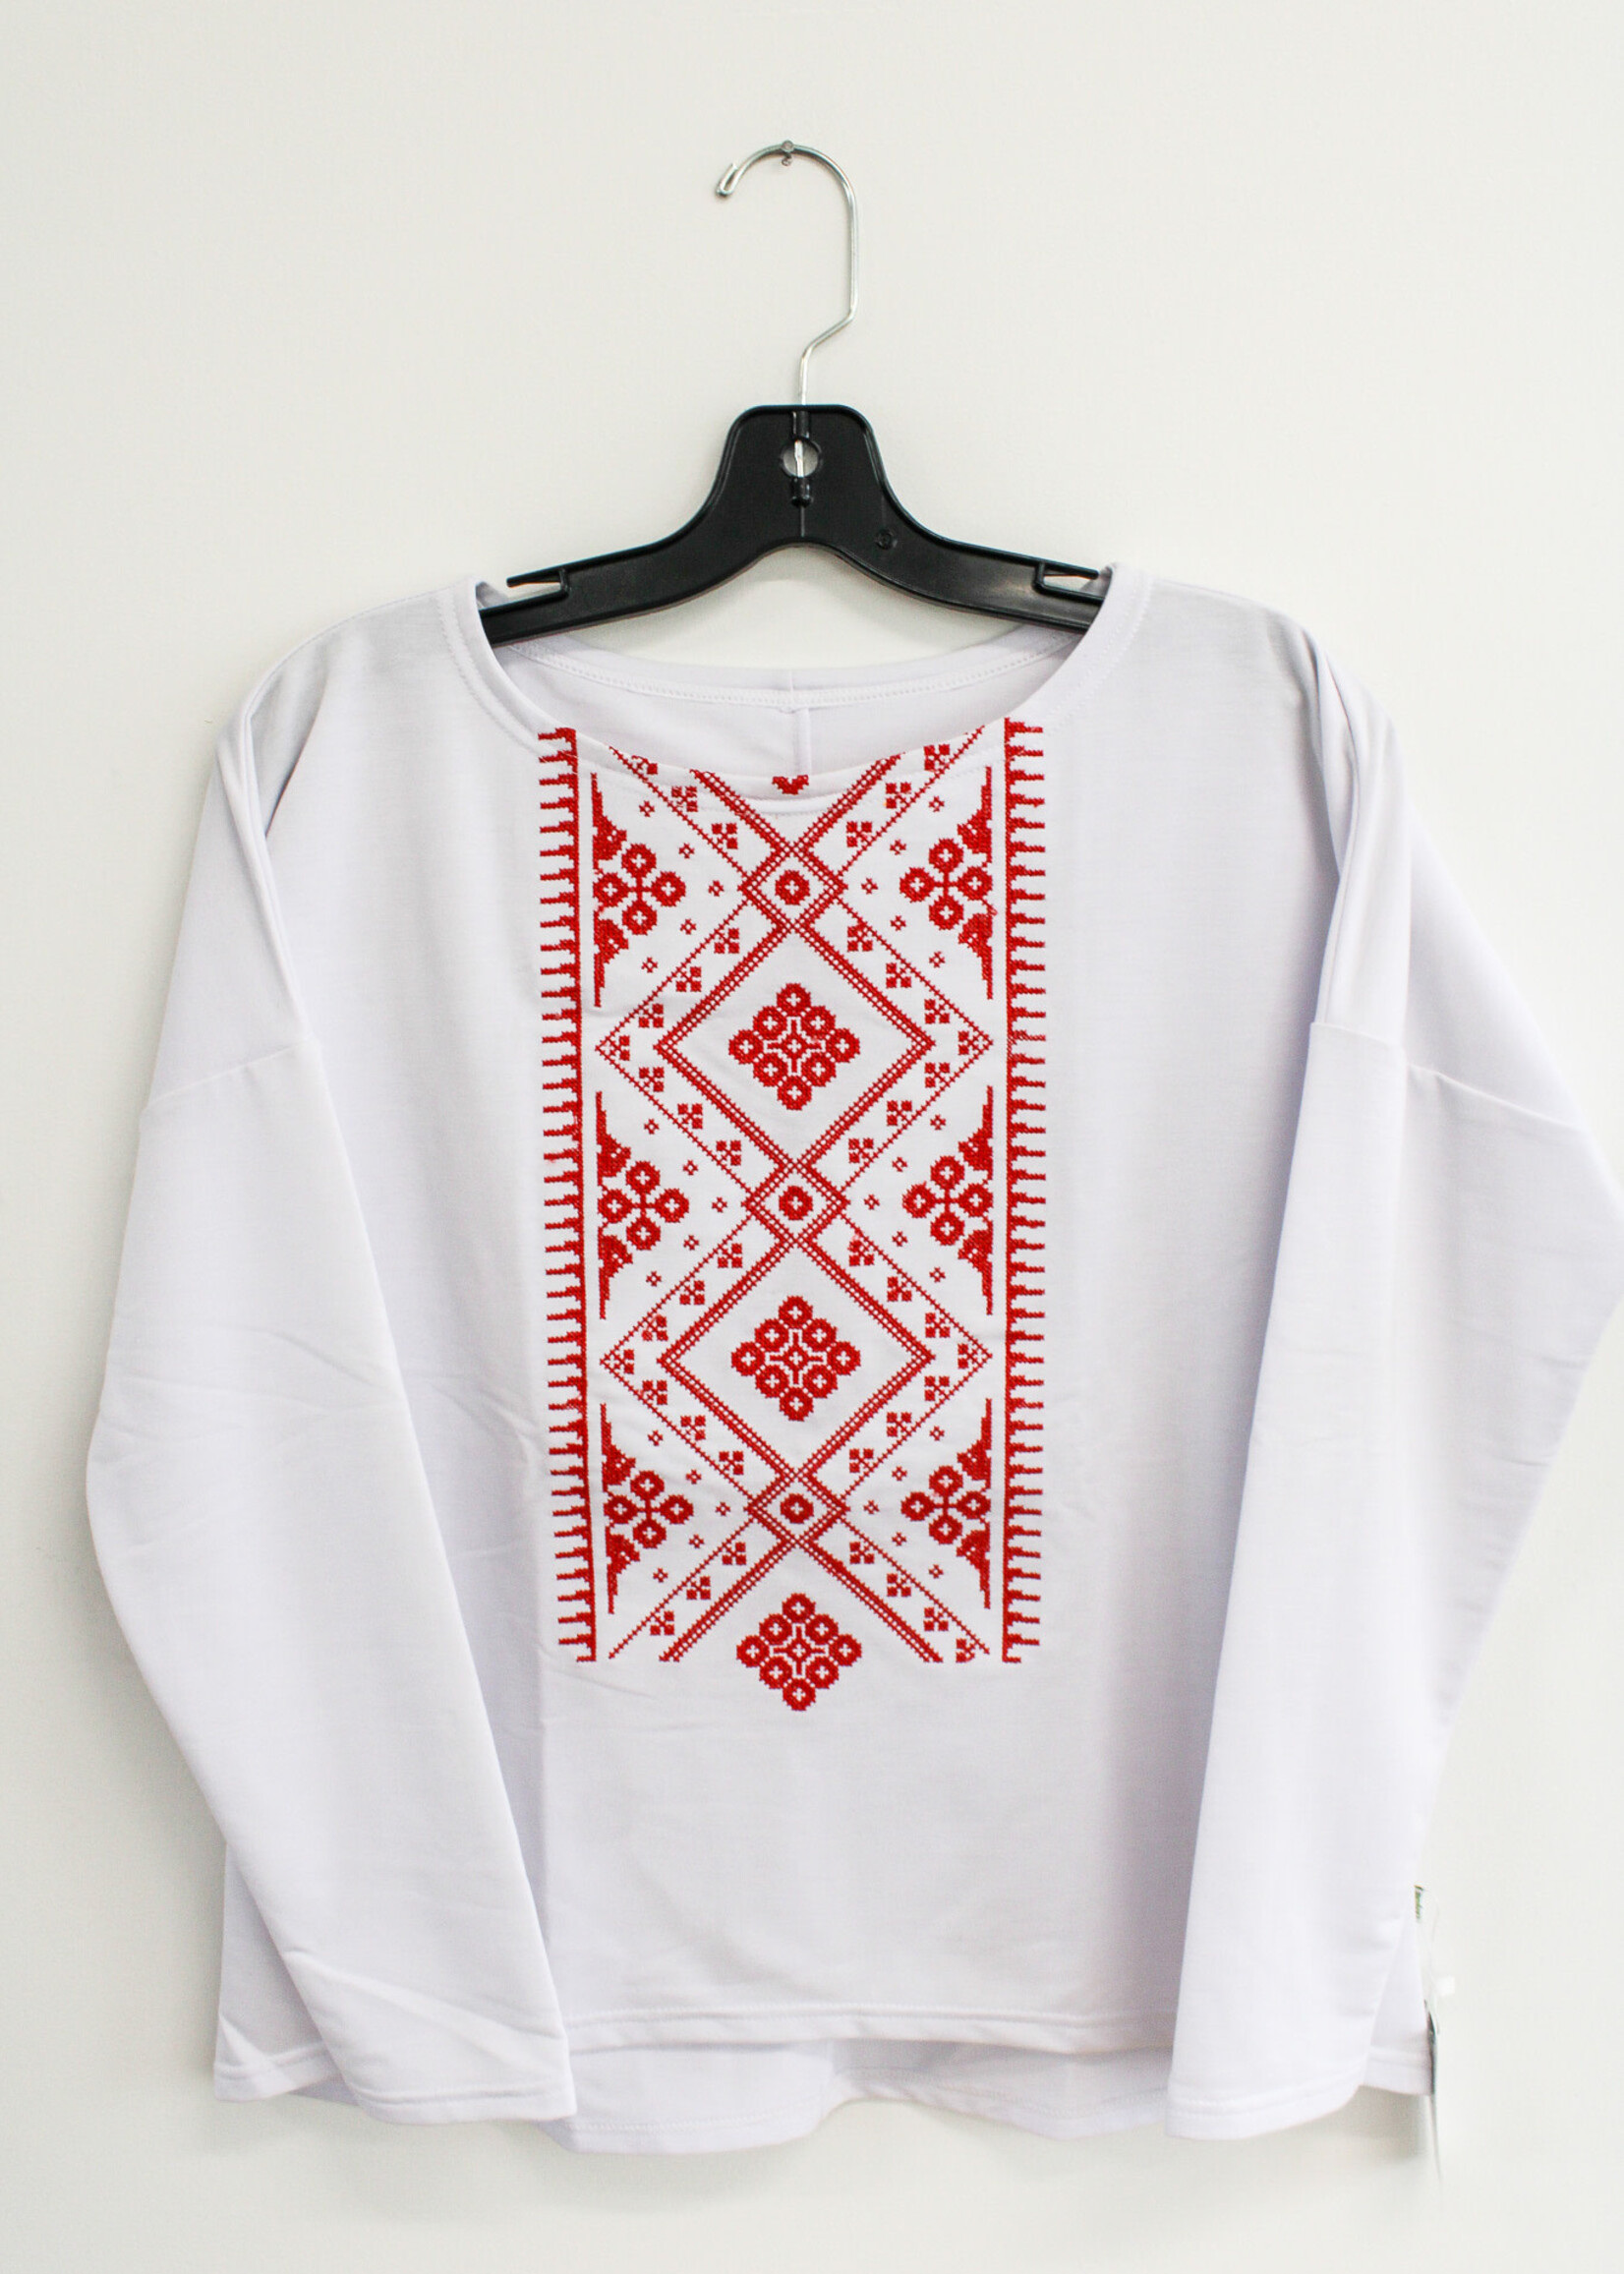 APPAREL -SWEATSHIRT - (W) White with Red embroidery